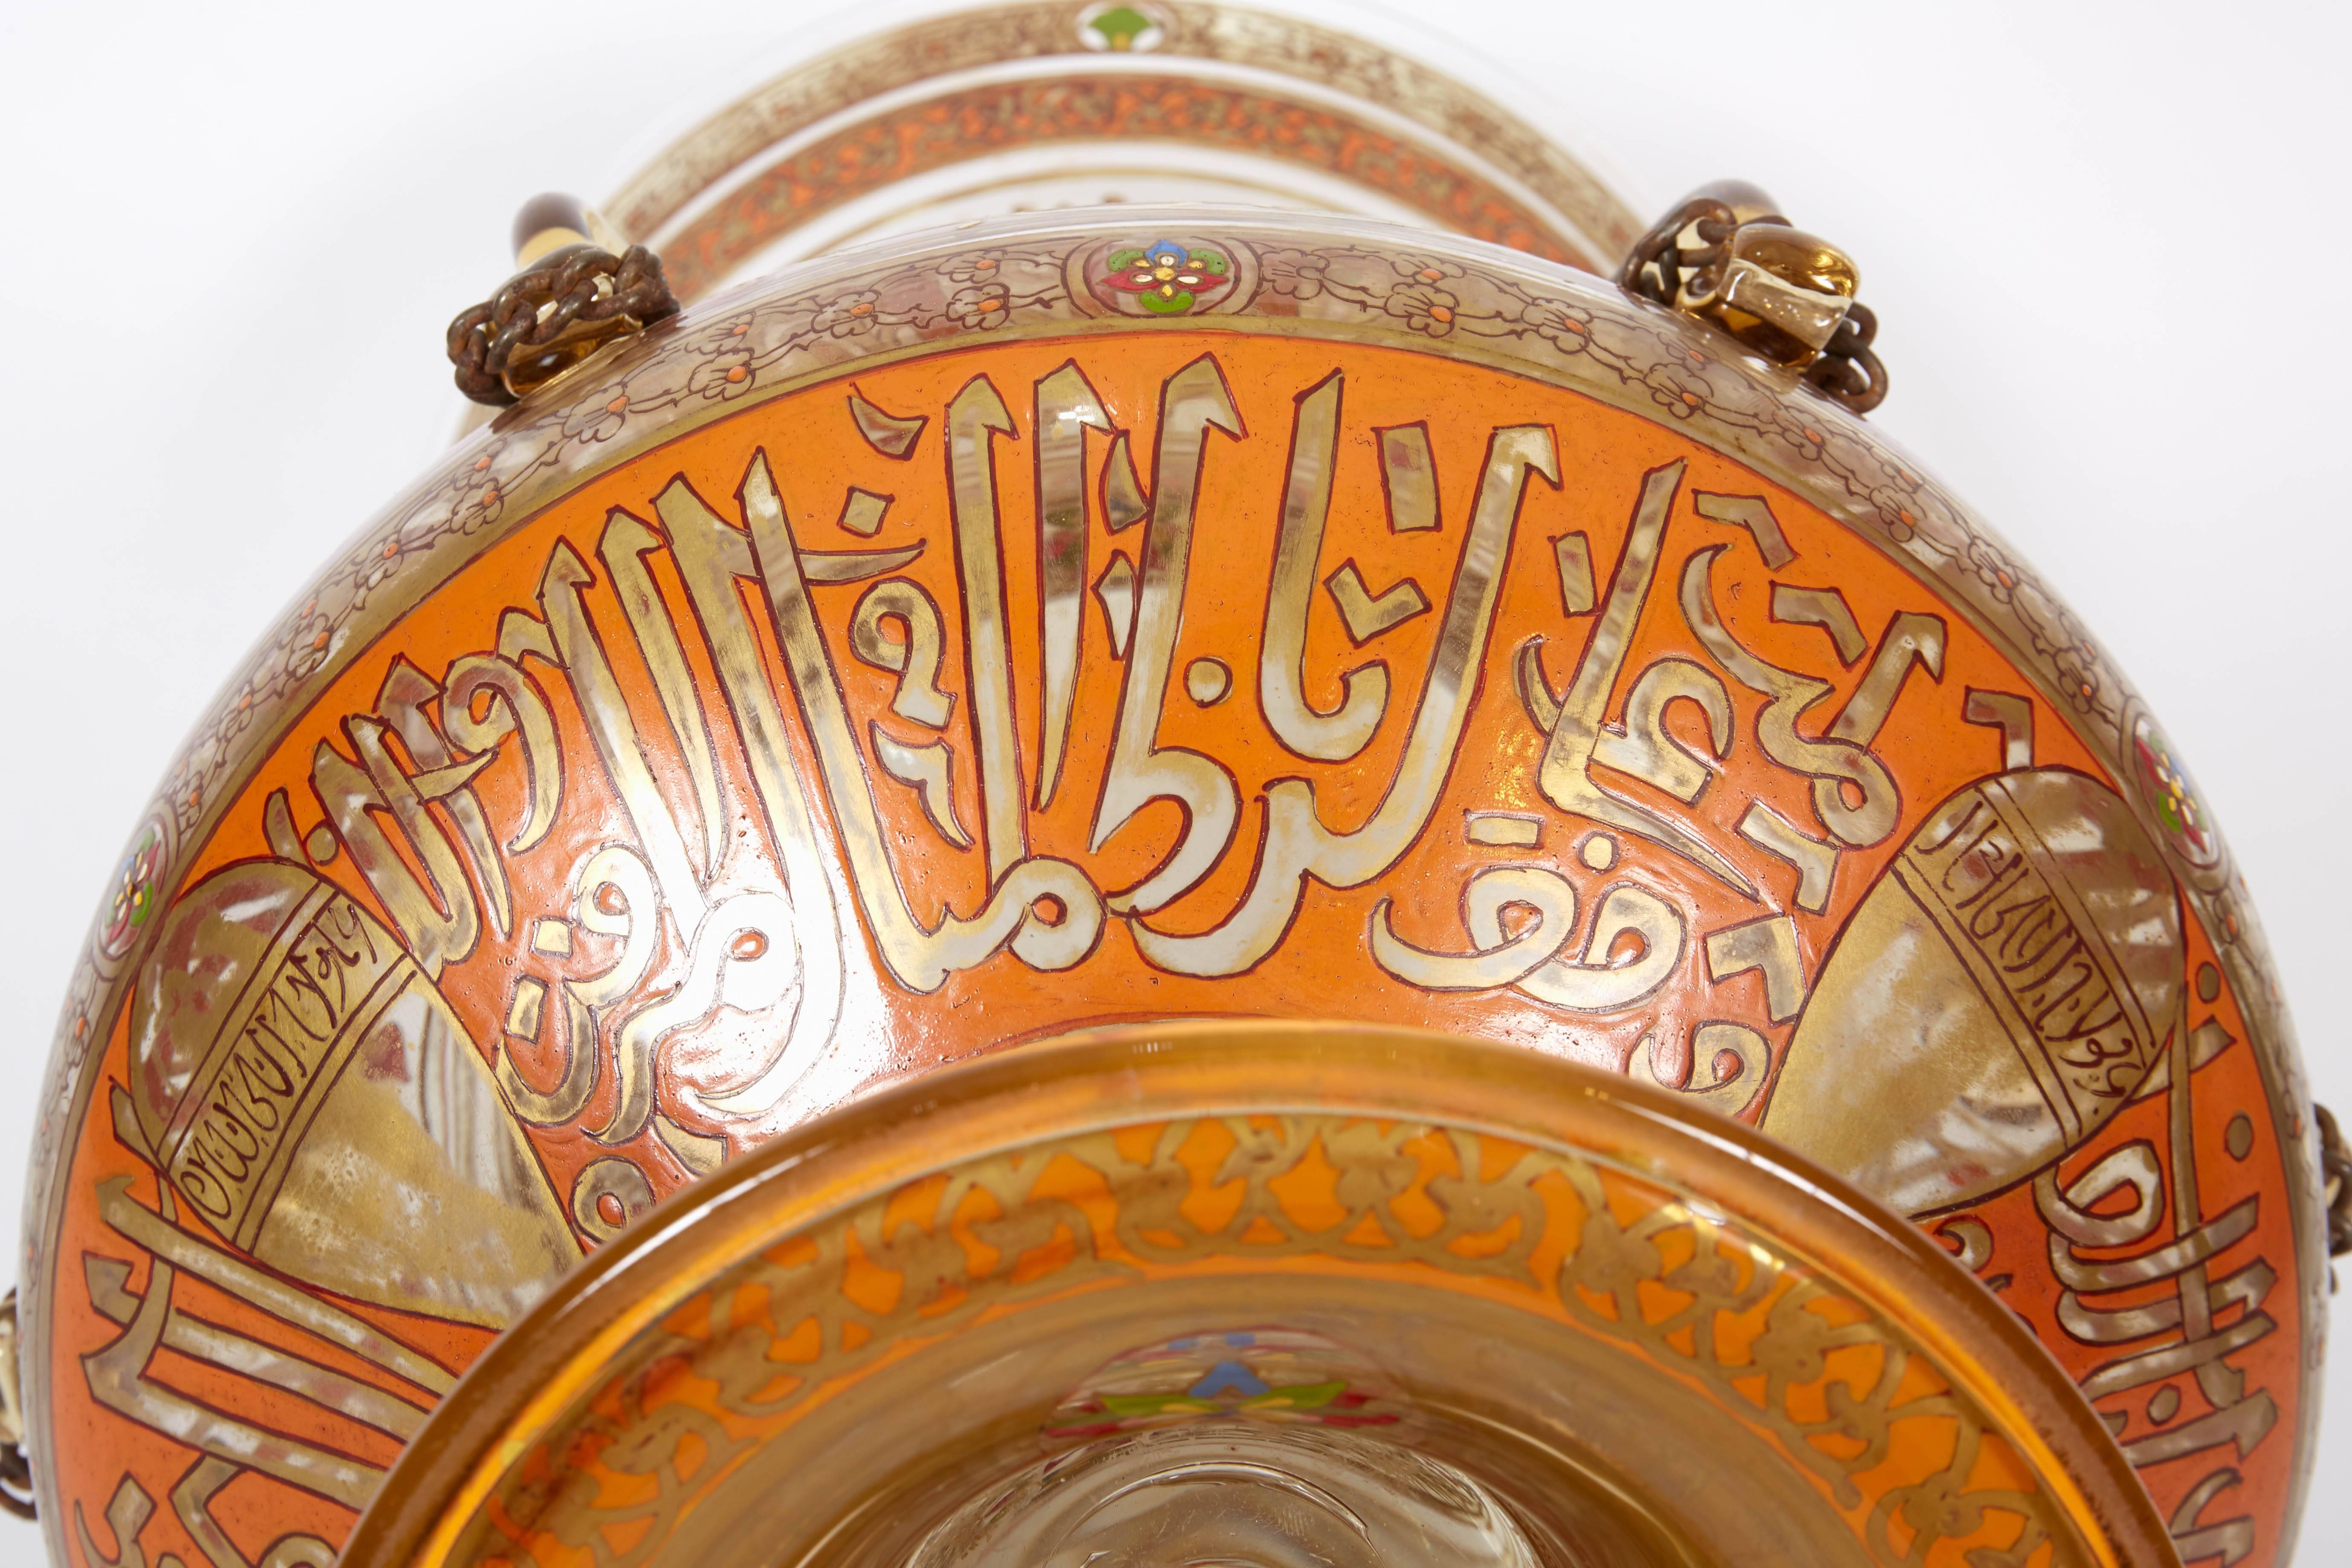 Rare French Enameled Mamluk Revival Glass Mosque Lamp by Philippe Joseph Brocard For Sale 2